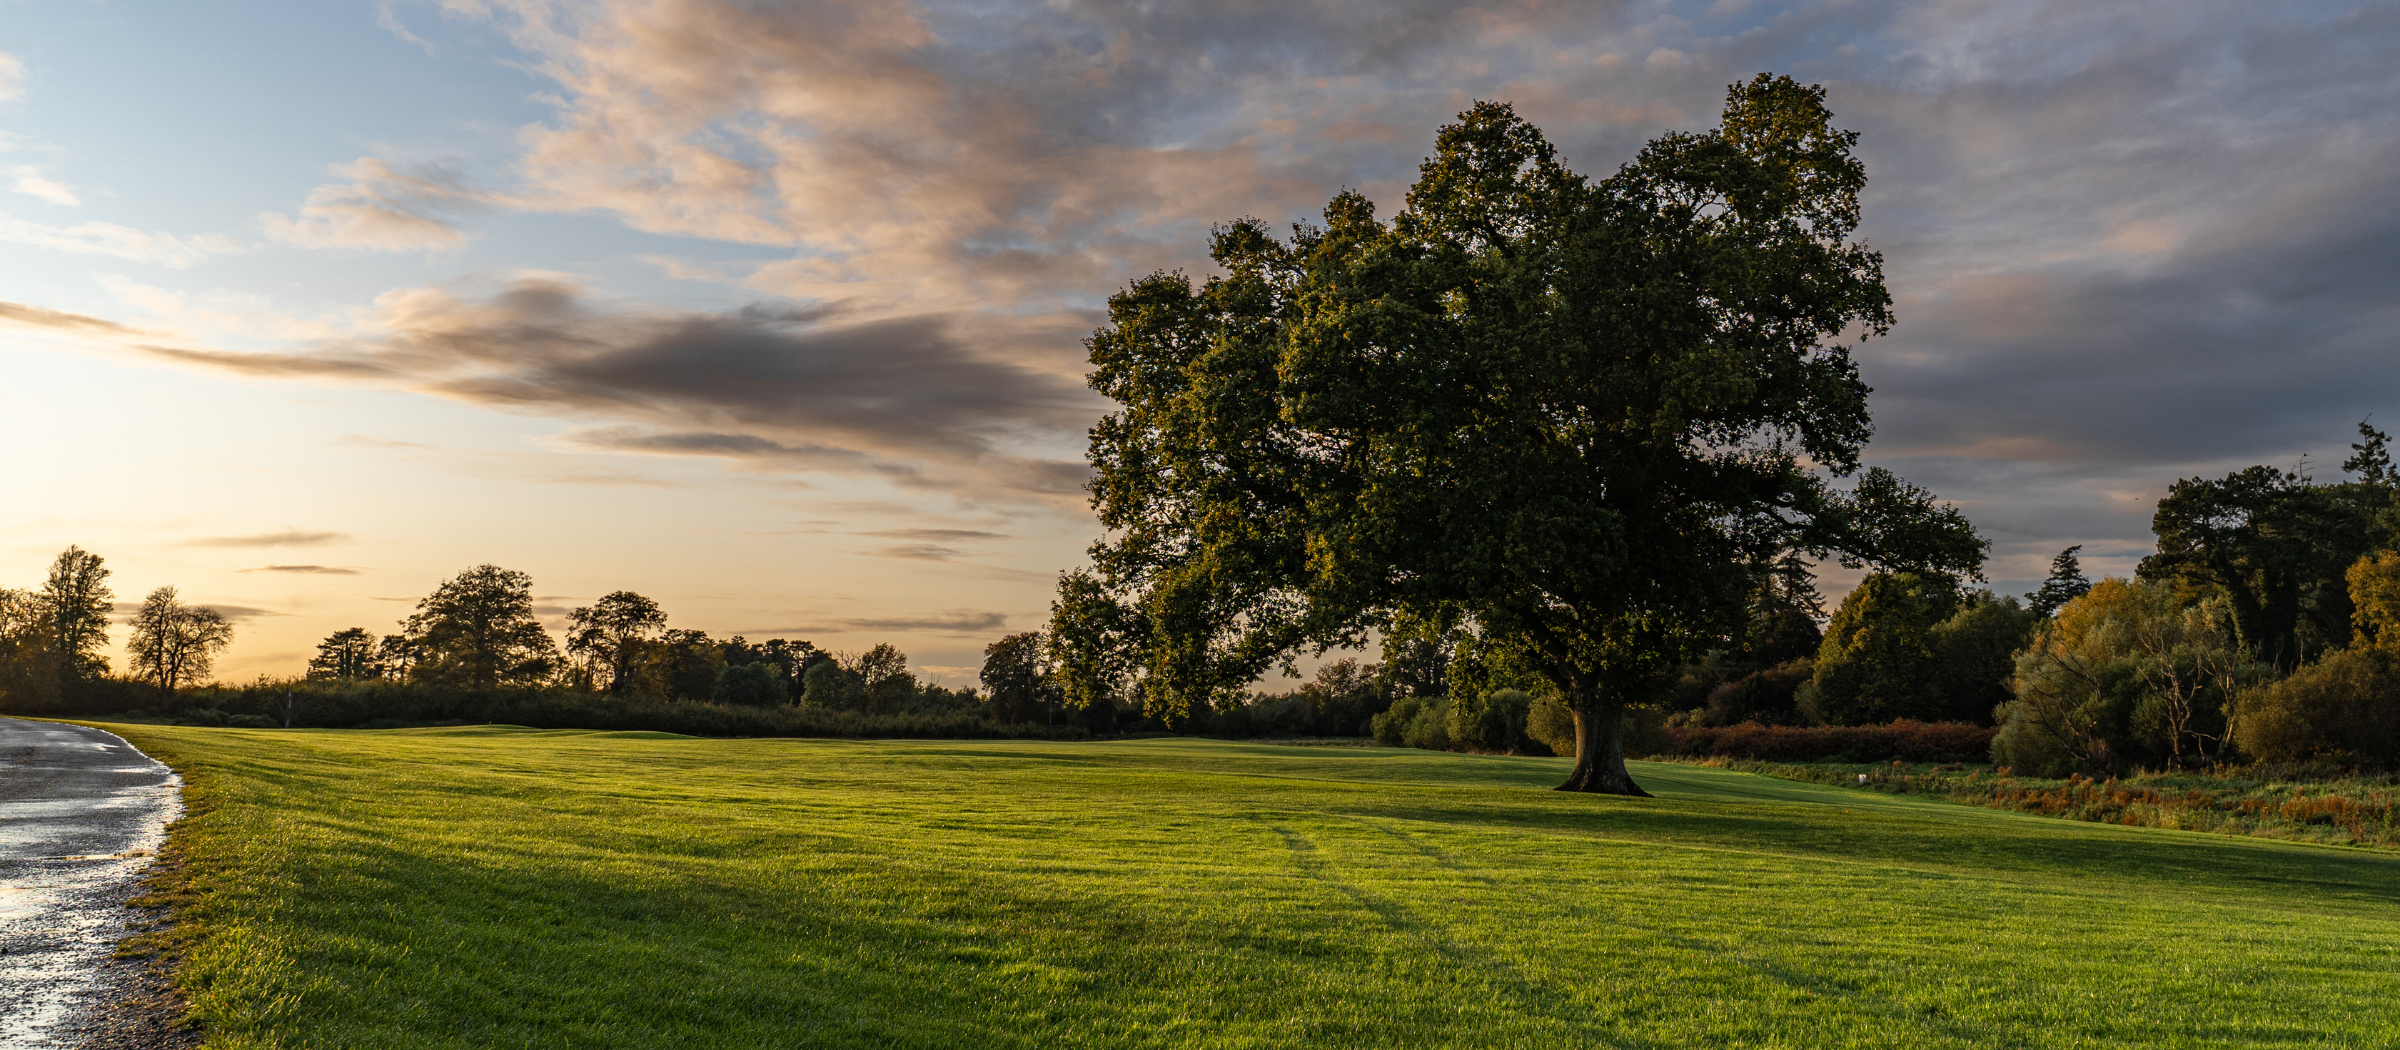 A green field in Maynooth, Co Kildare.